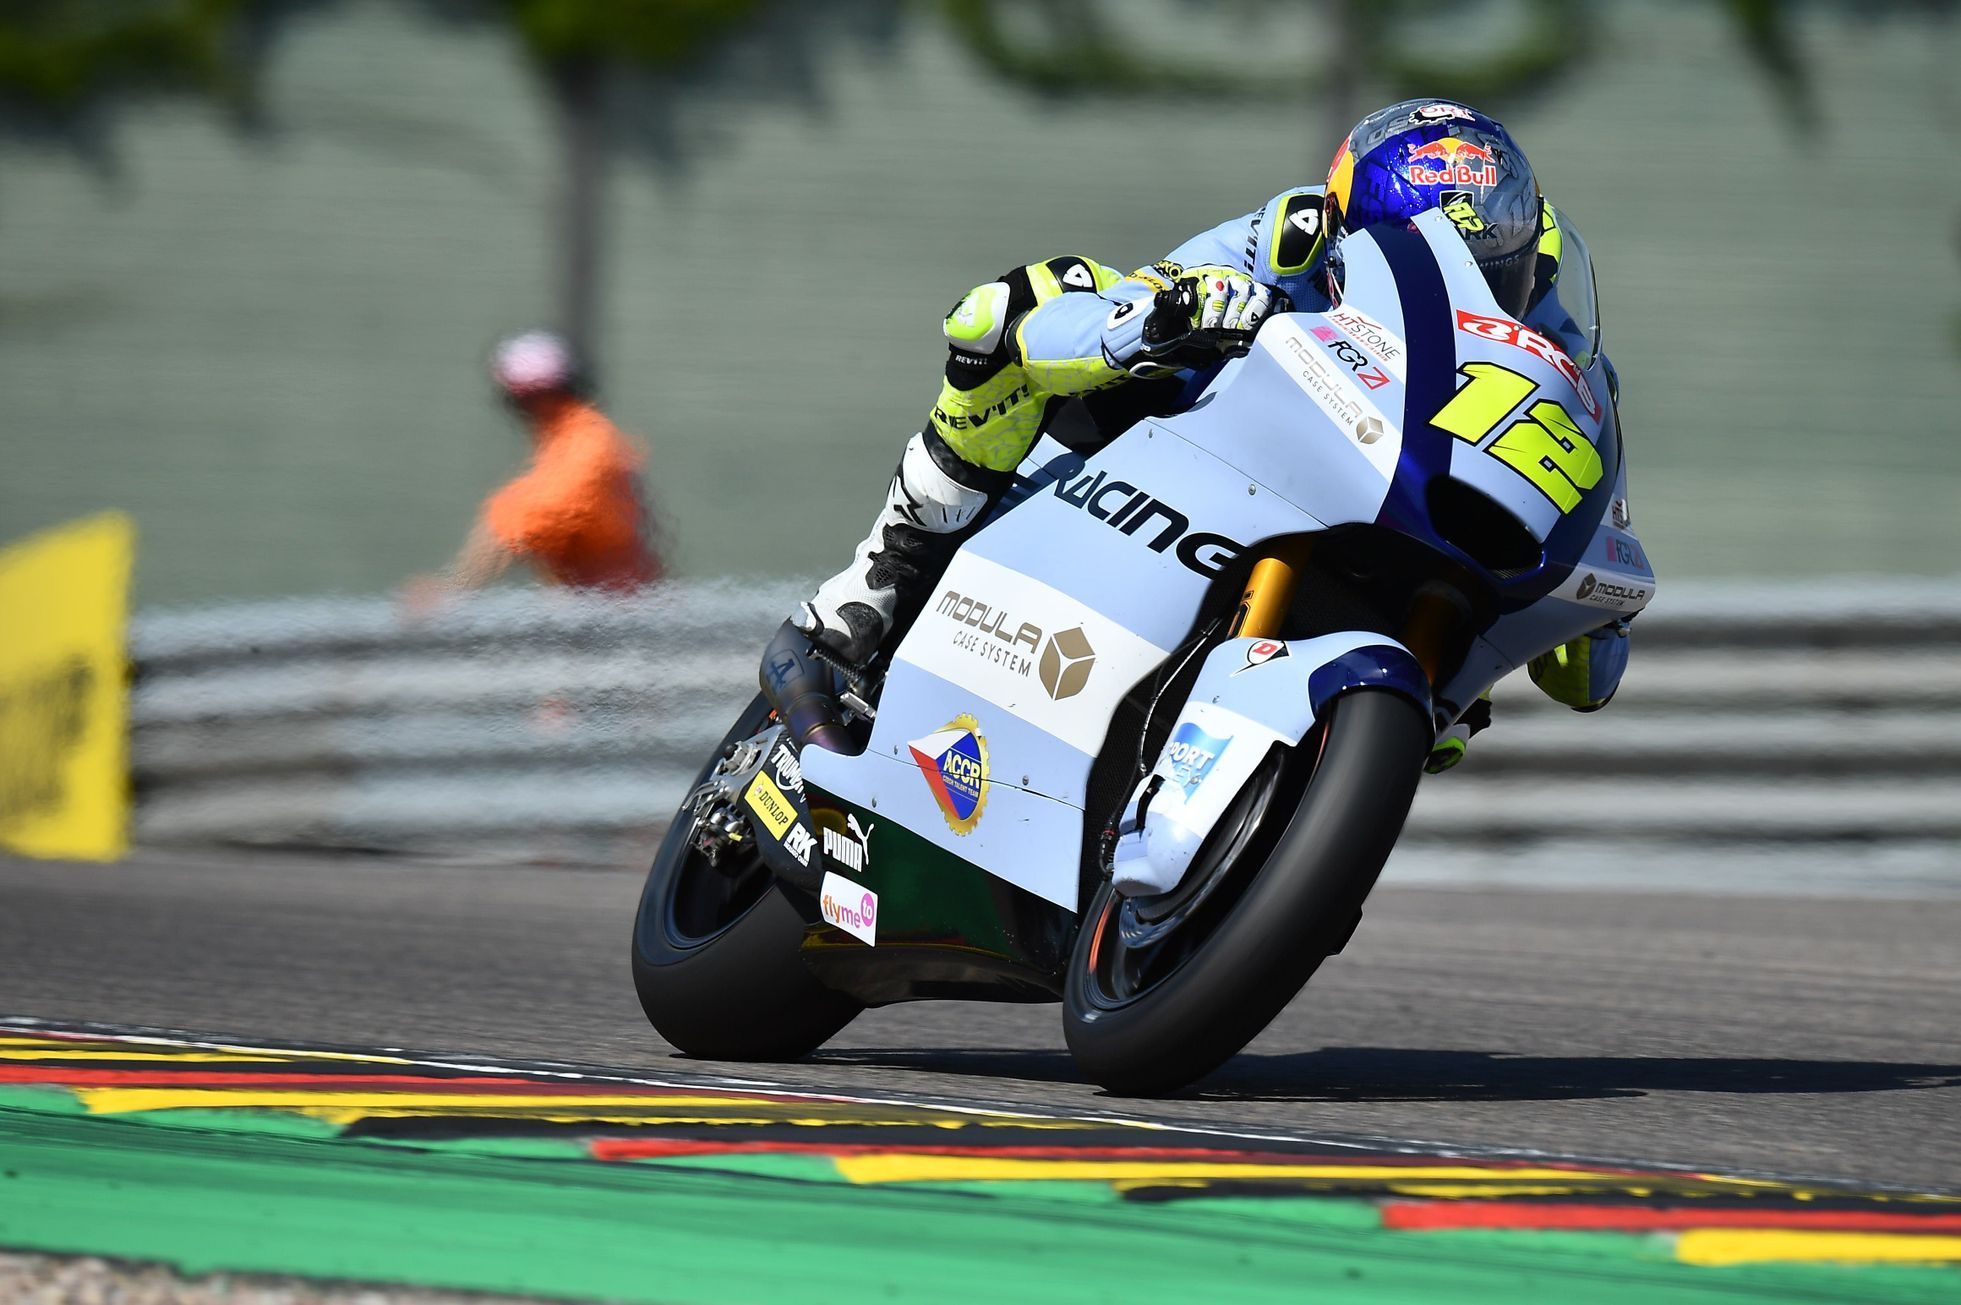 Salač did not finish the race at Sachsenring after a futile battle for points